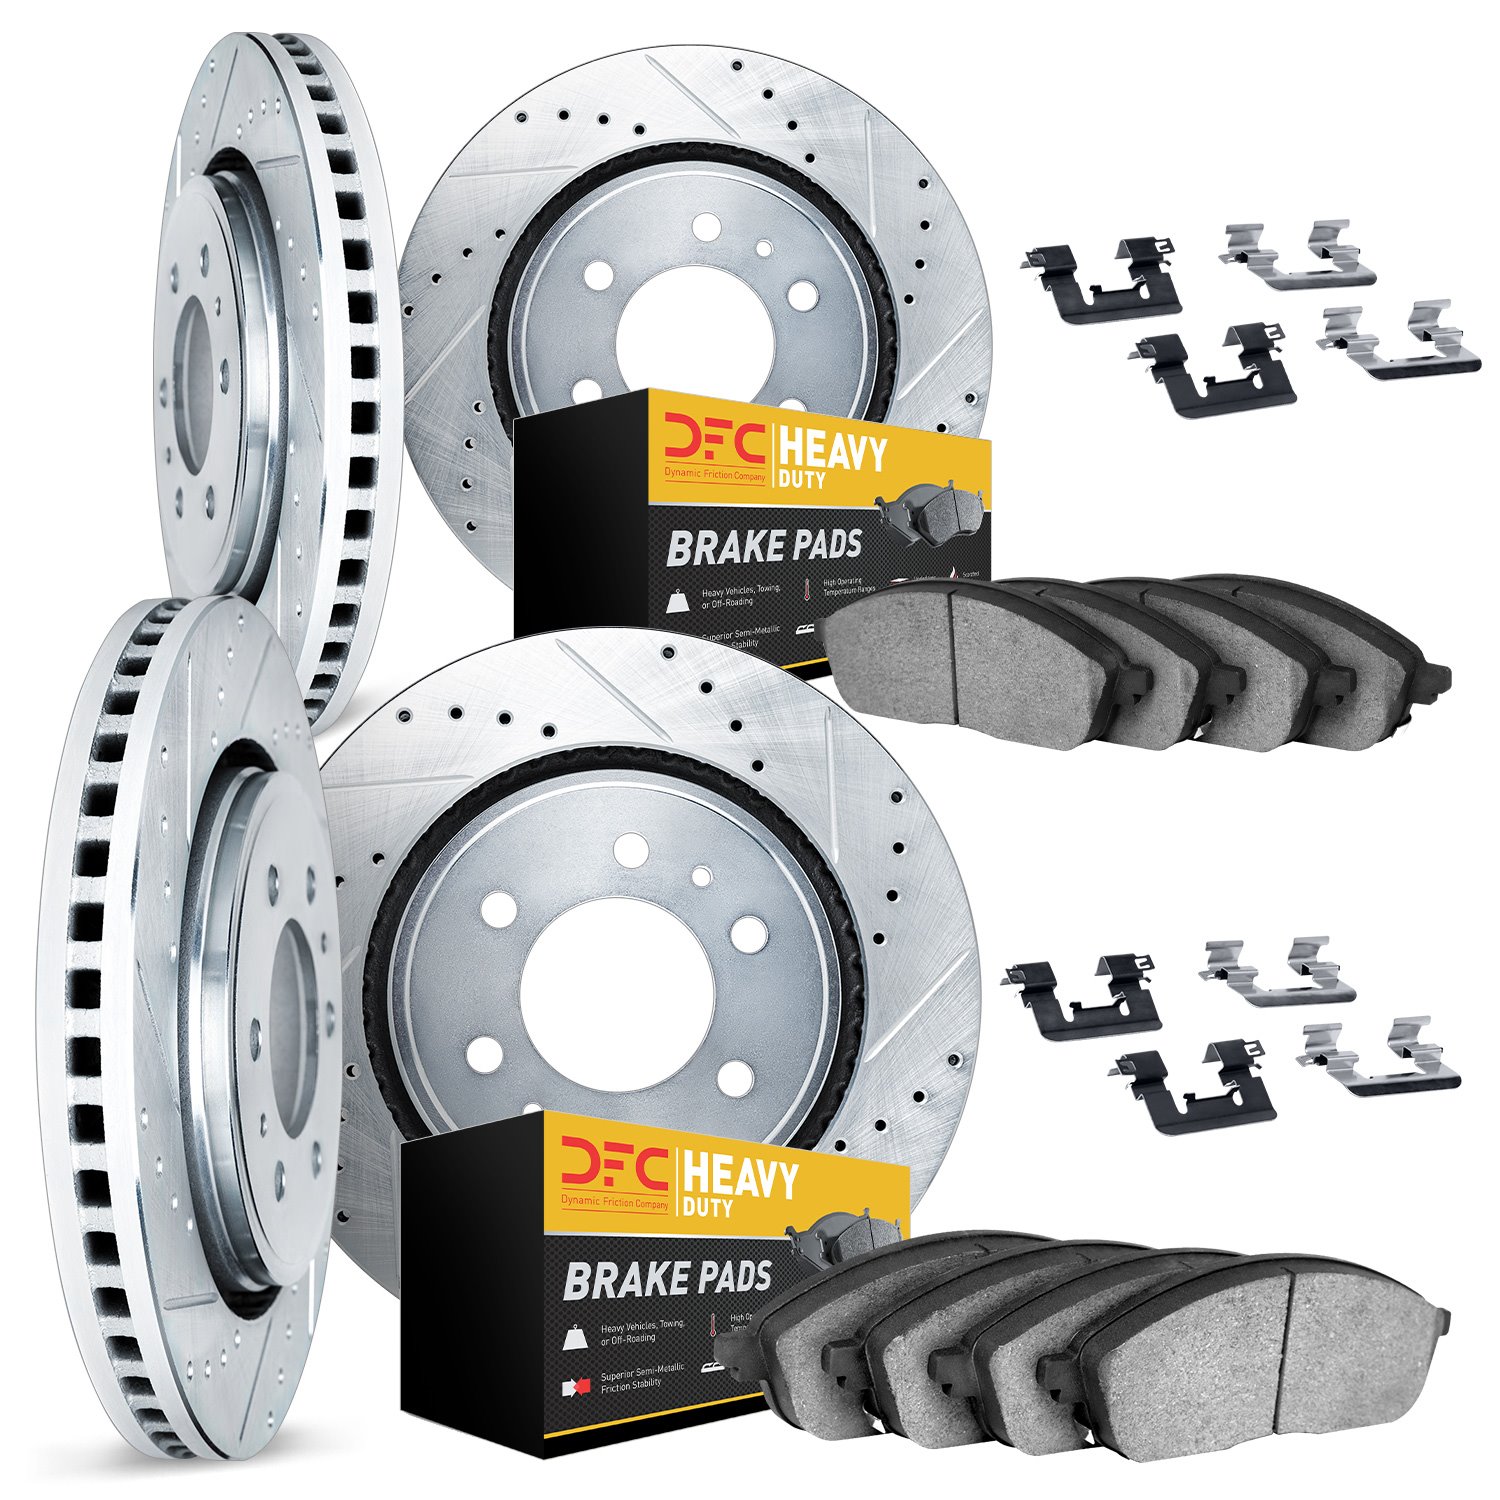 7214-54063 Drilled/Slotted Rotors w/Heavy-Duty Brake Pads Kit & Hardware [Silver], 2004-2008 Ford/Lincoln/Mercury/Mazda, Positio